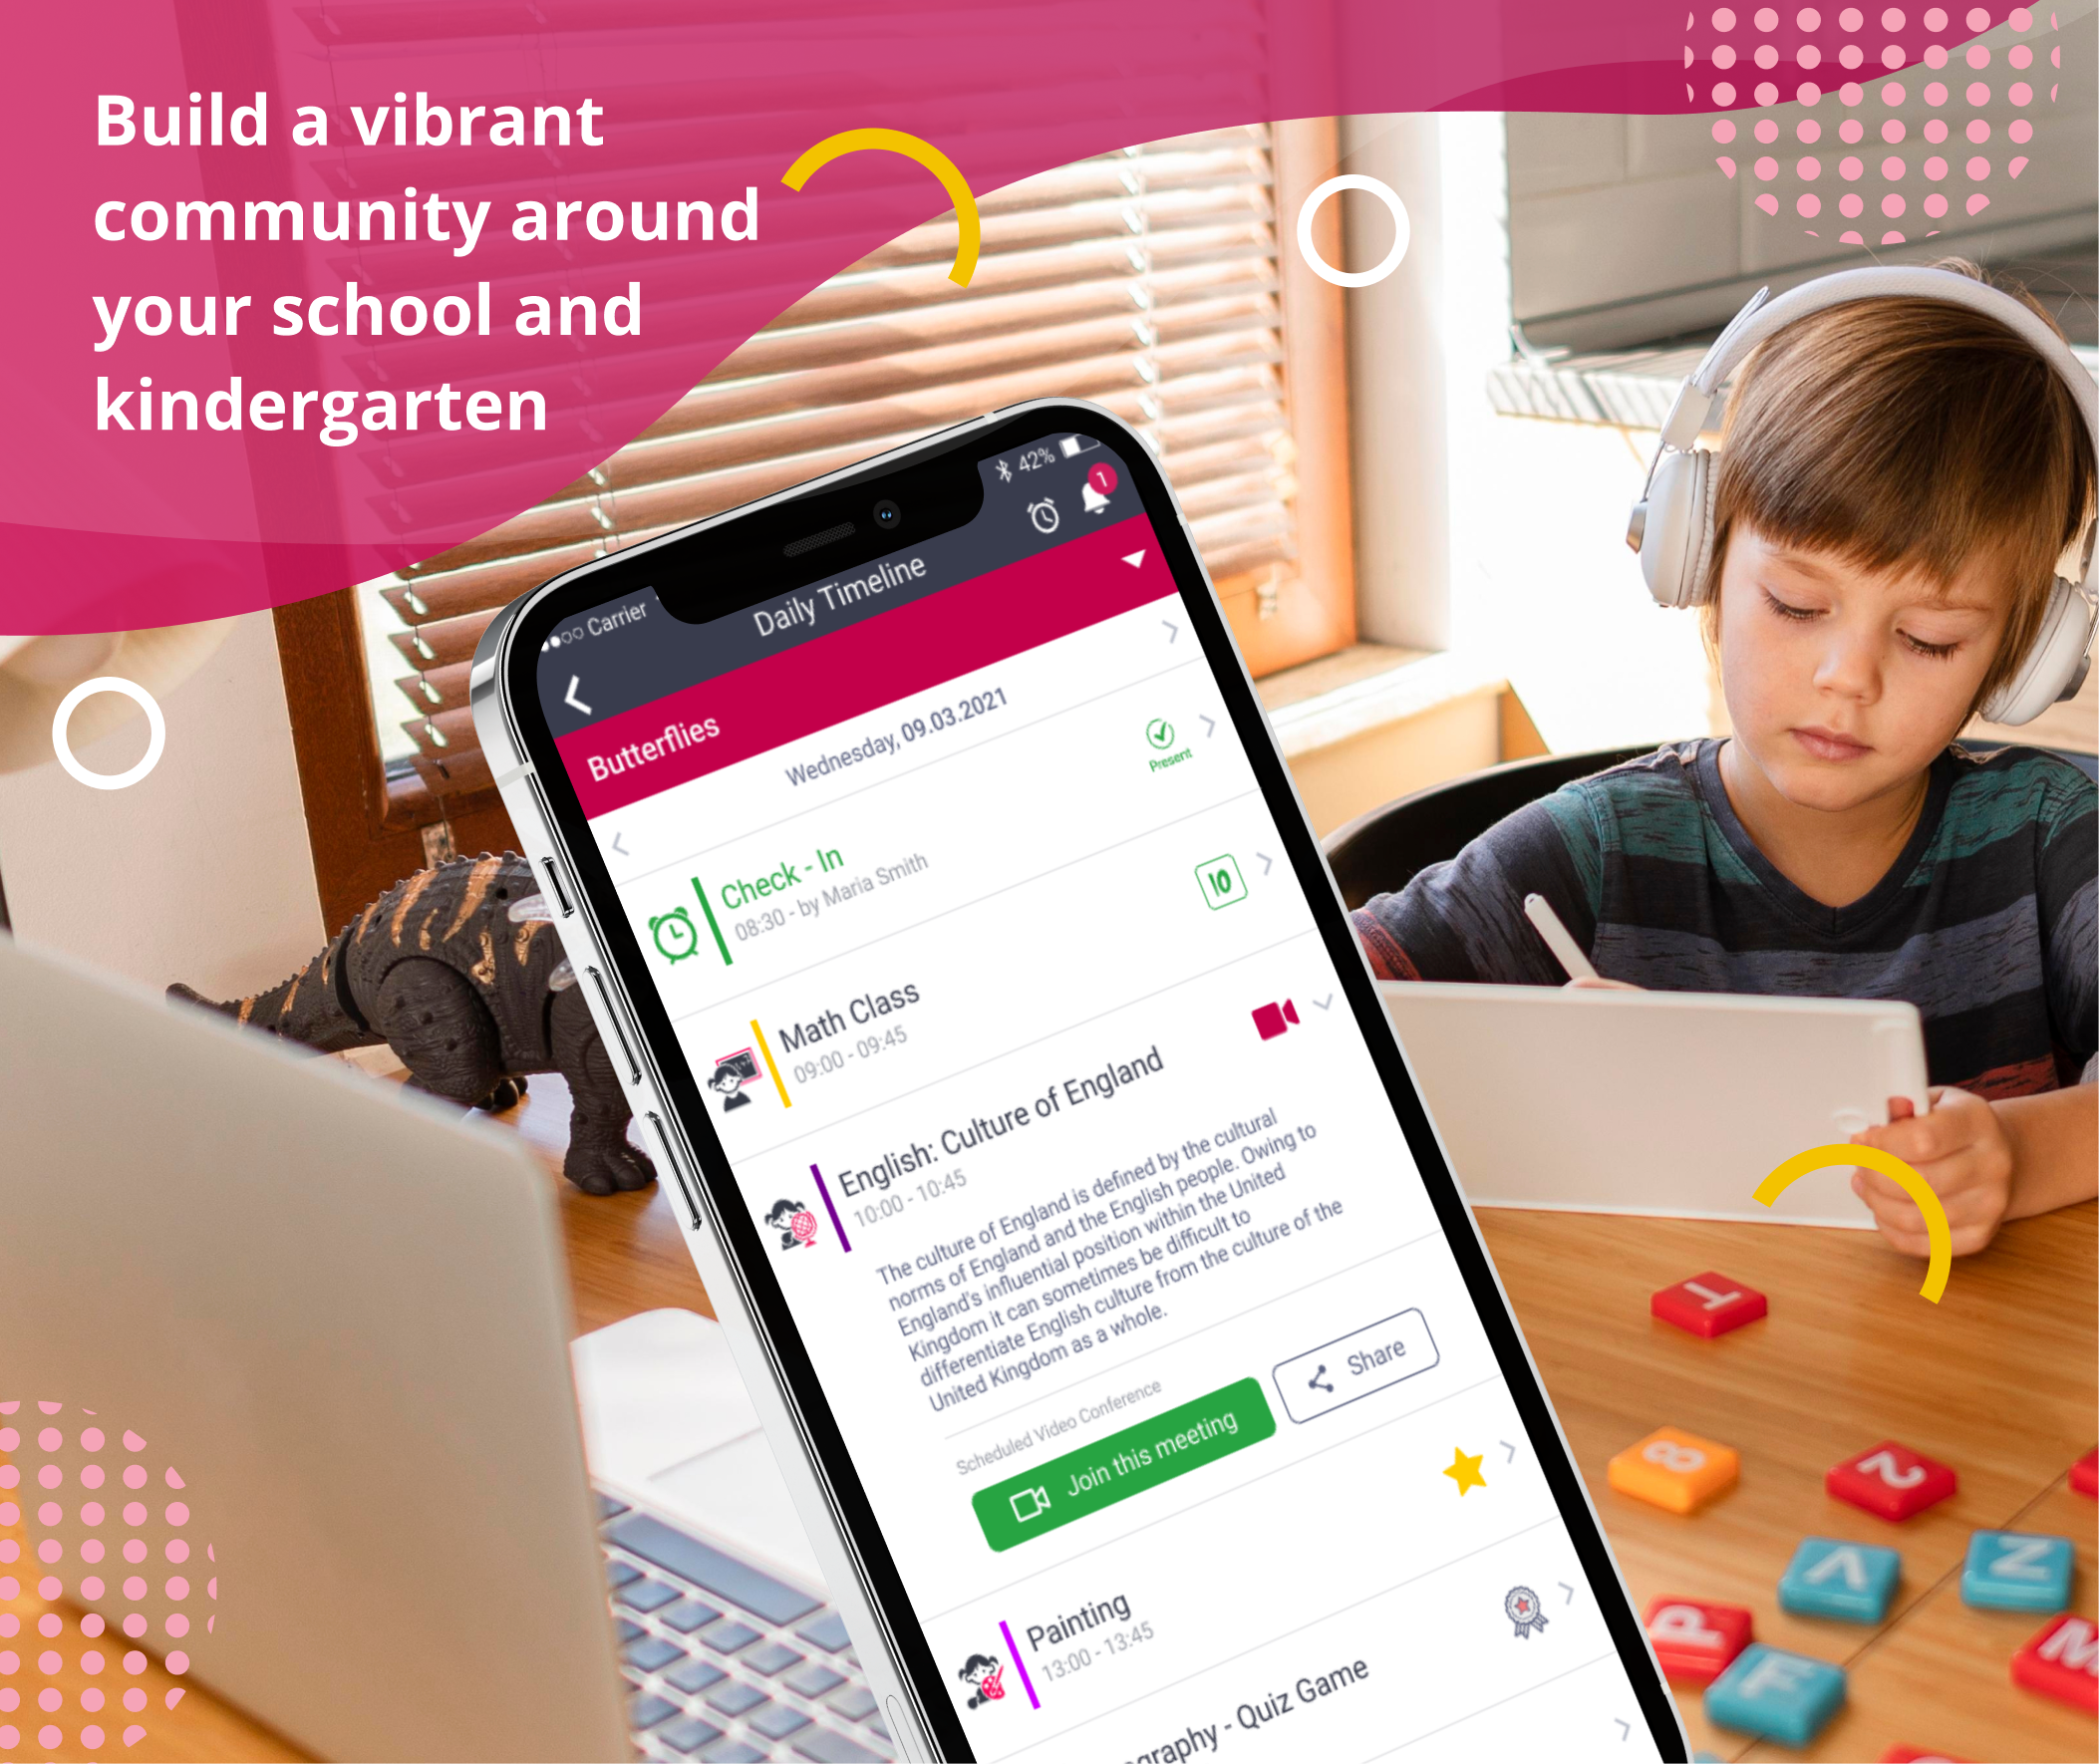 Kinderpedia's Daily Timeline allows students and parents to obtain an instant snapshot of their daily schedule, as well as their tasks and results. For younger children, the app shows how much they are, slept and how they engaged in daily activities.